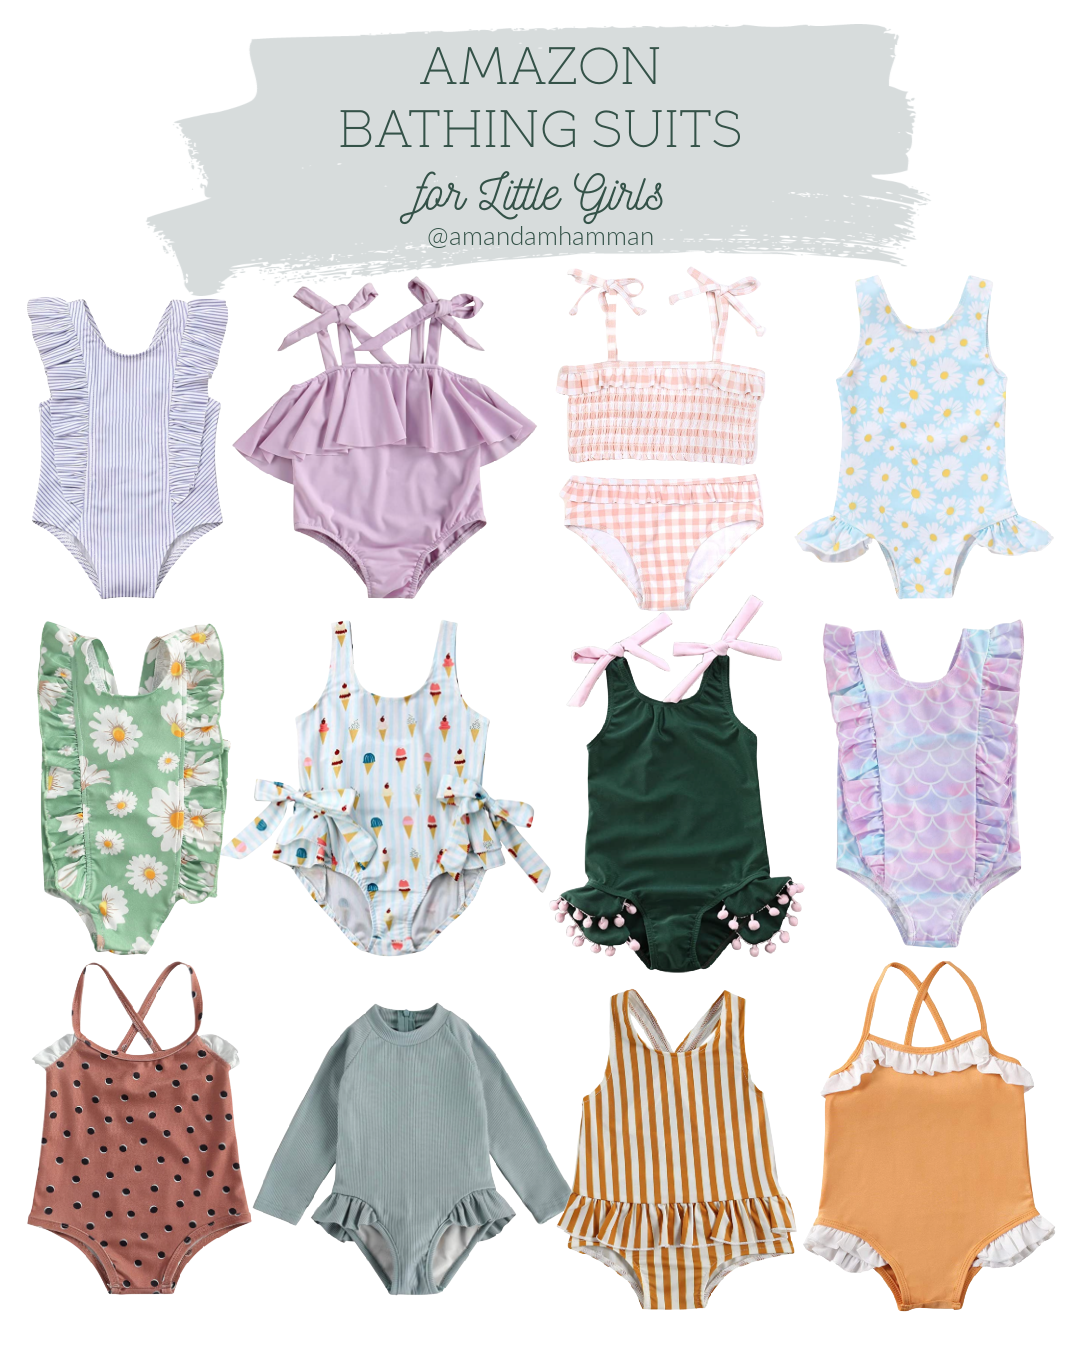 Amazon Bathing Suits for Little Girls!